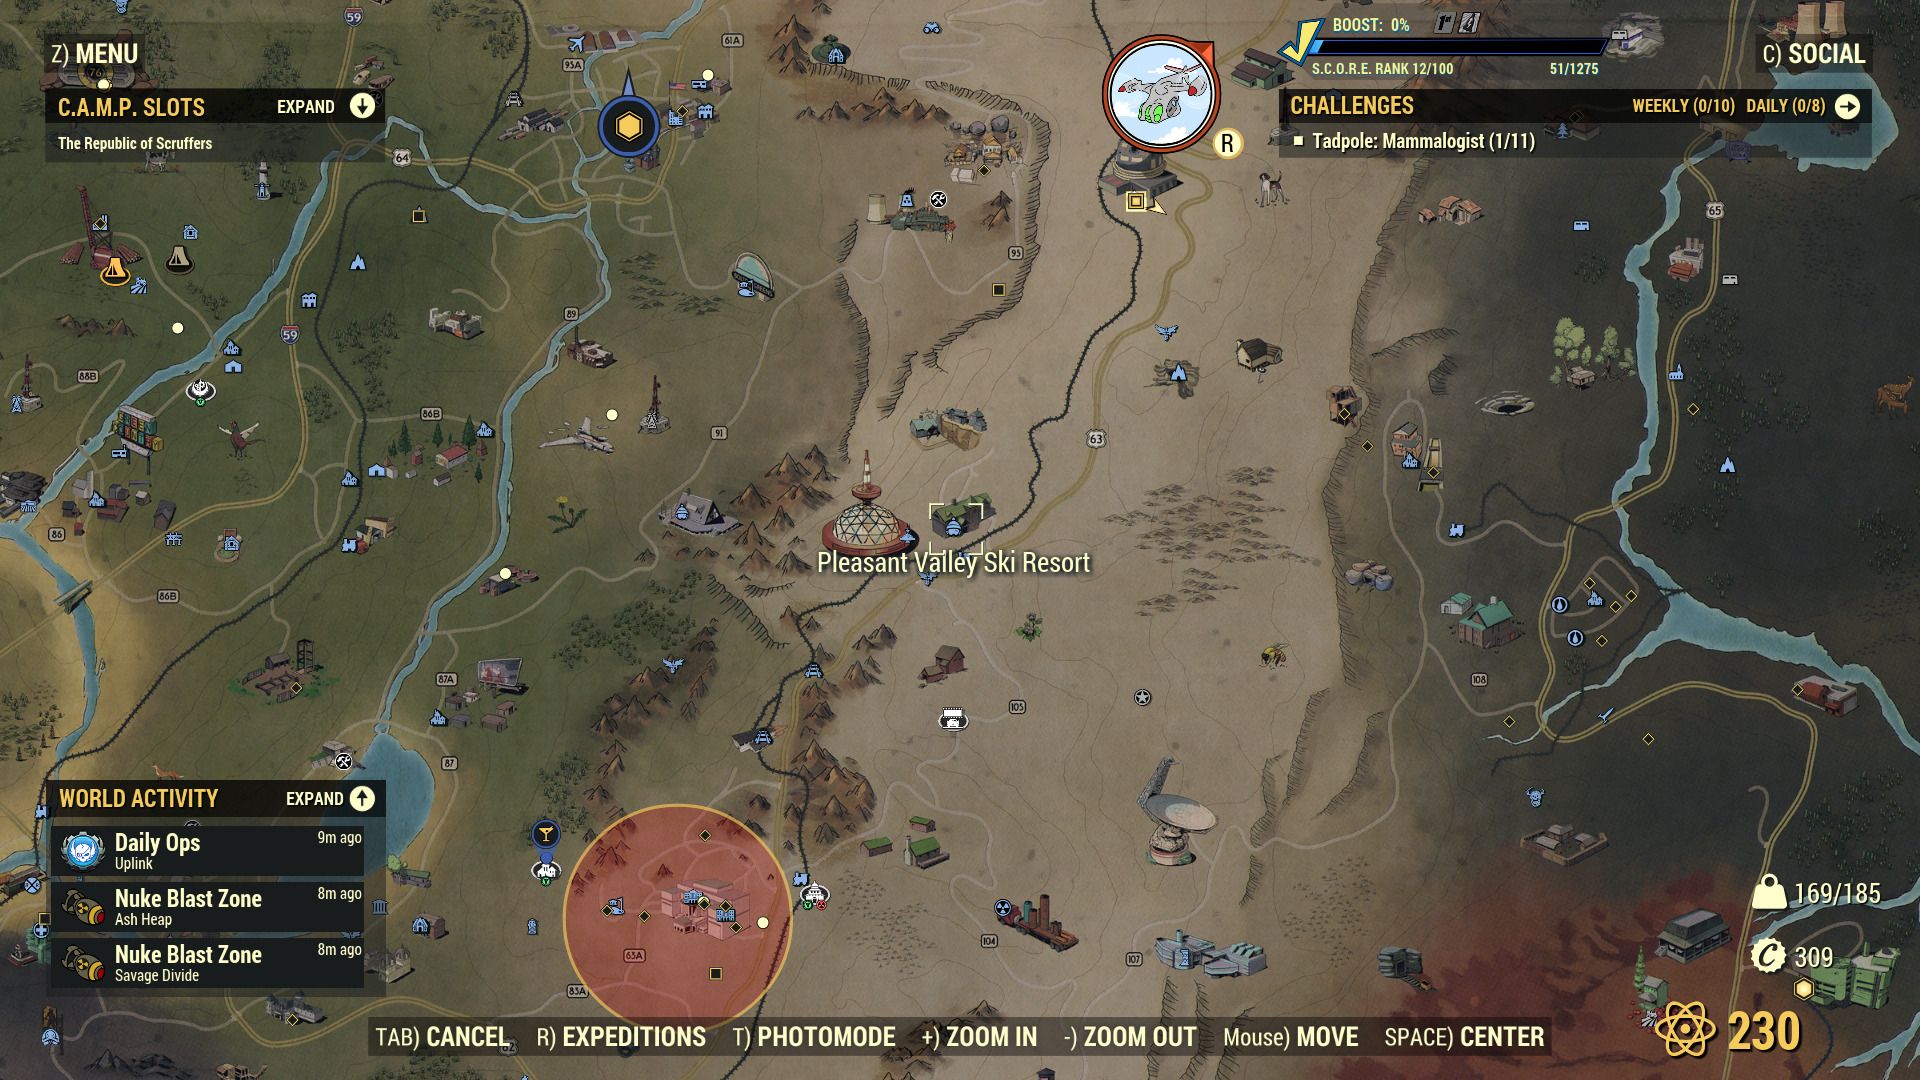 Image of the location on the map of pleasant valley ski resort in Fallout 76